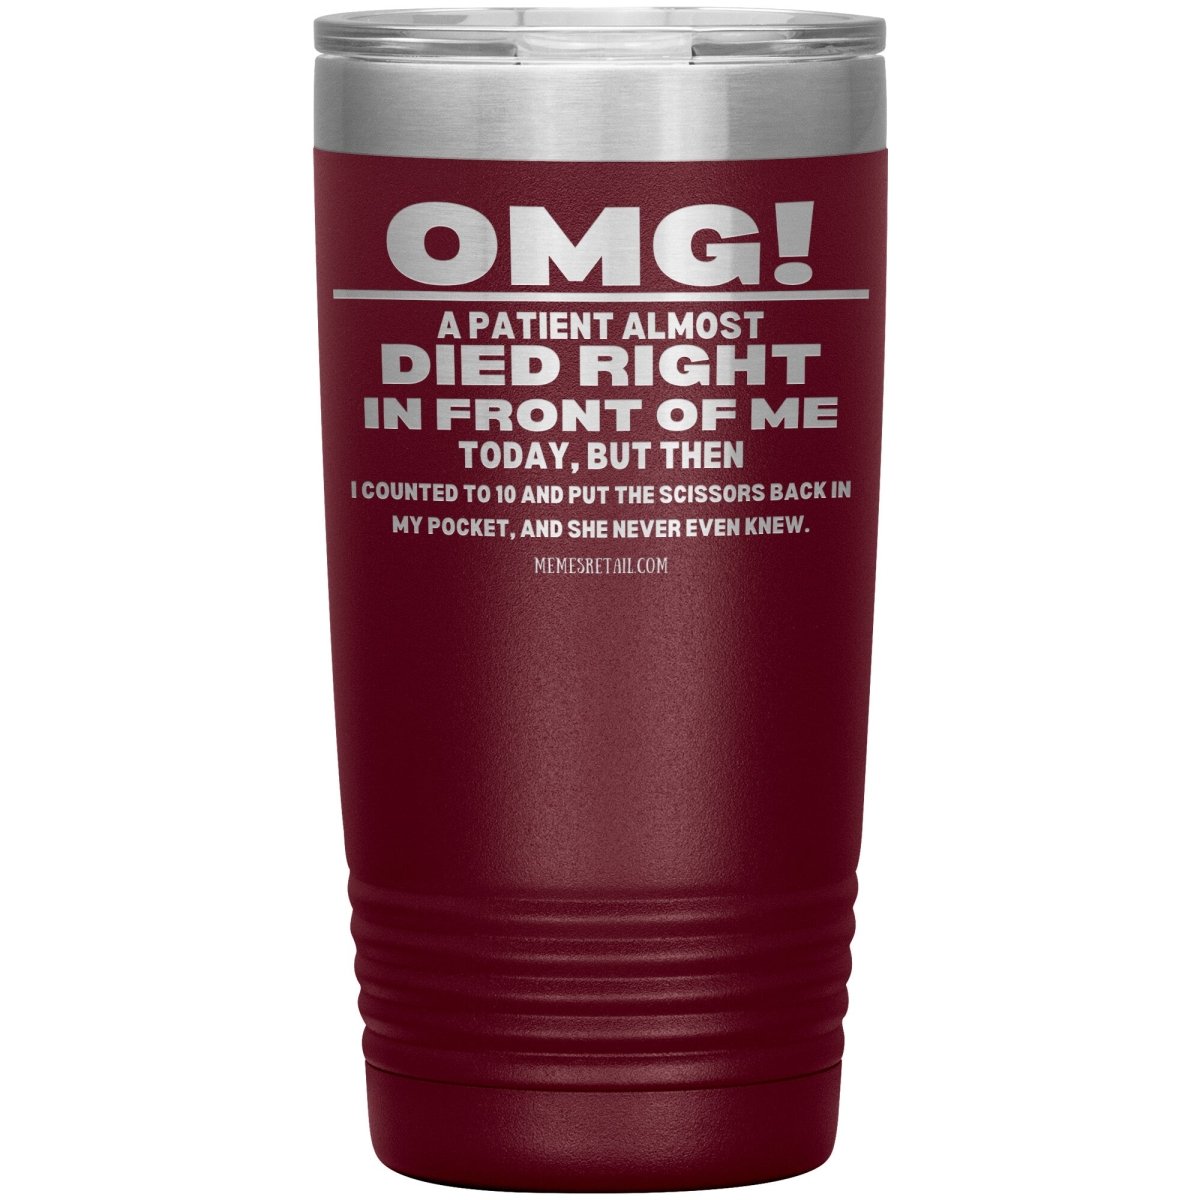 OMG! A Patient Almost Died Today Tumblers, 20oz Insulated Tumbler / Maroon - MemesRetail.com